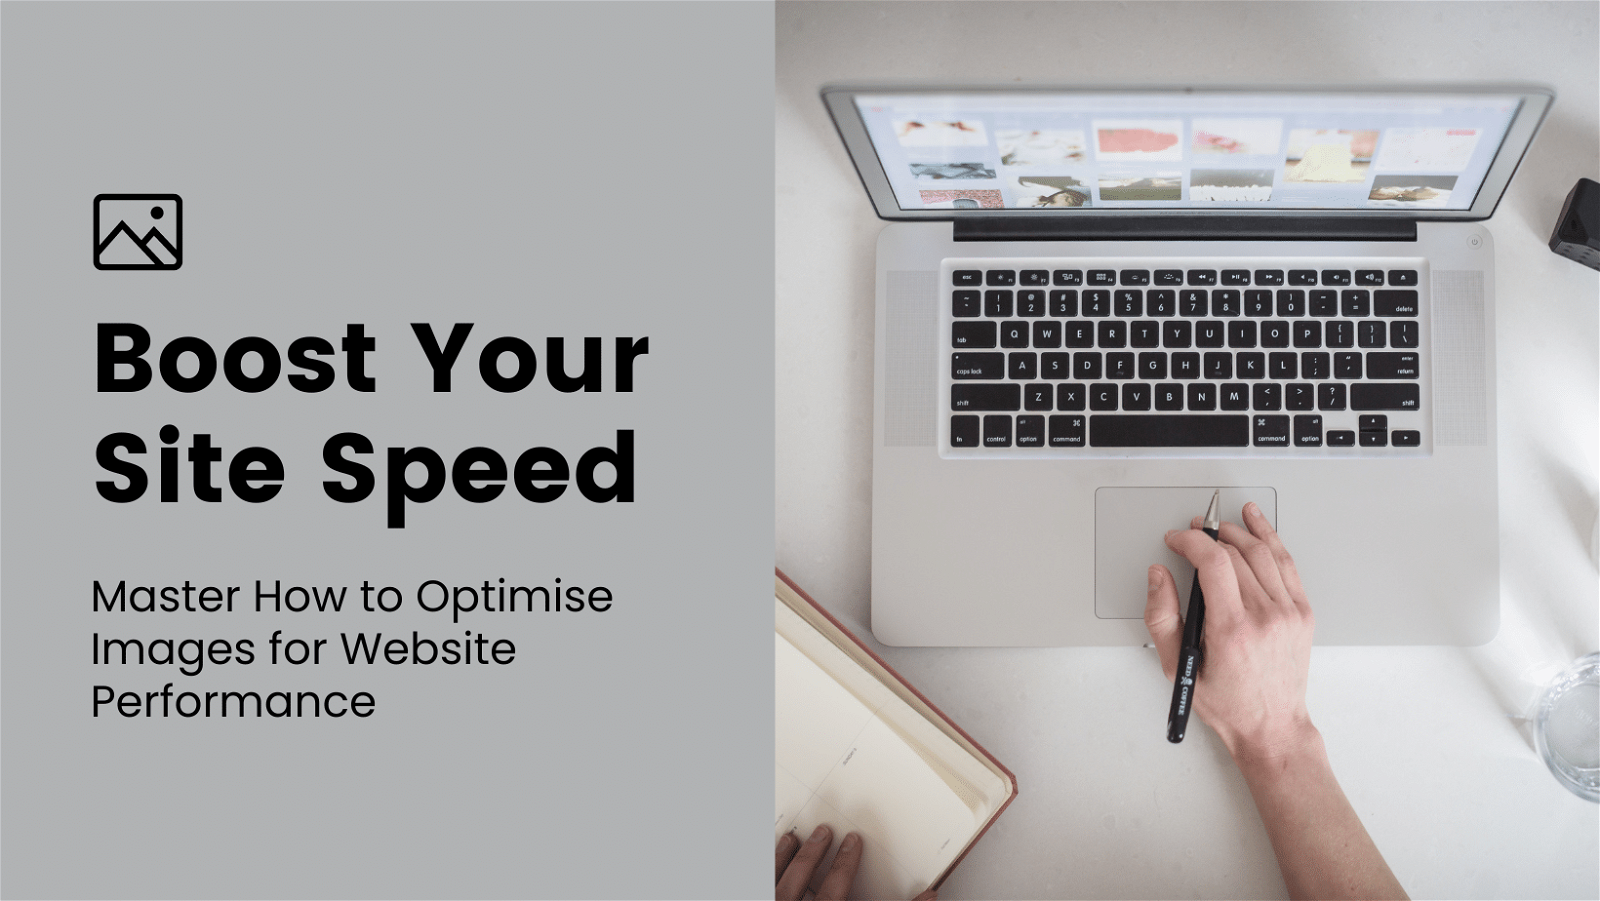 Boost your site speed master how to optimize images for website performance.